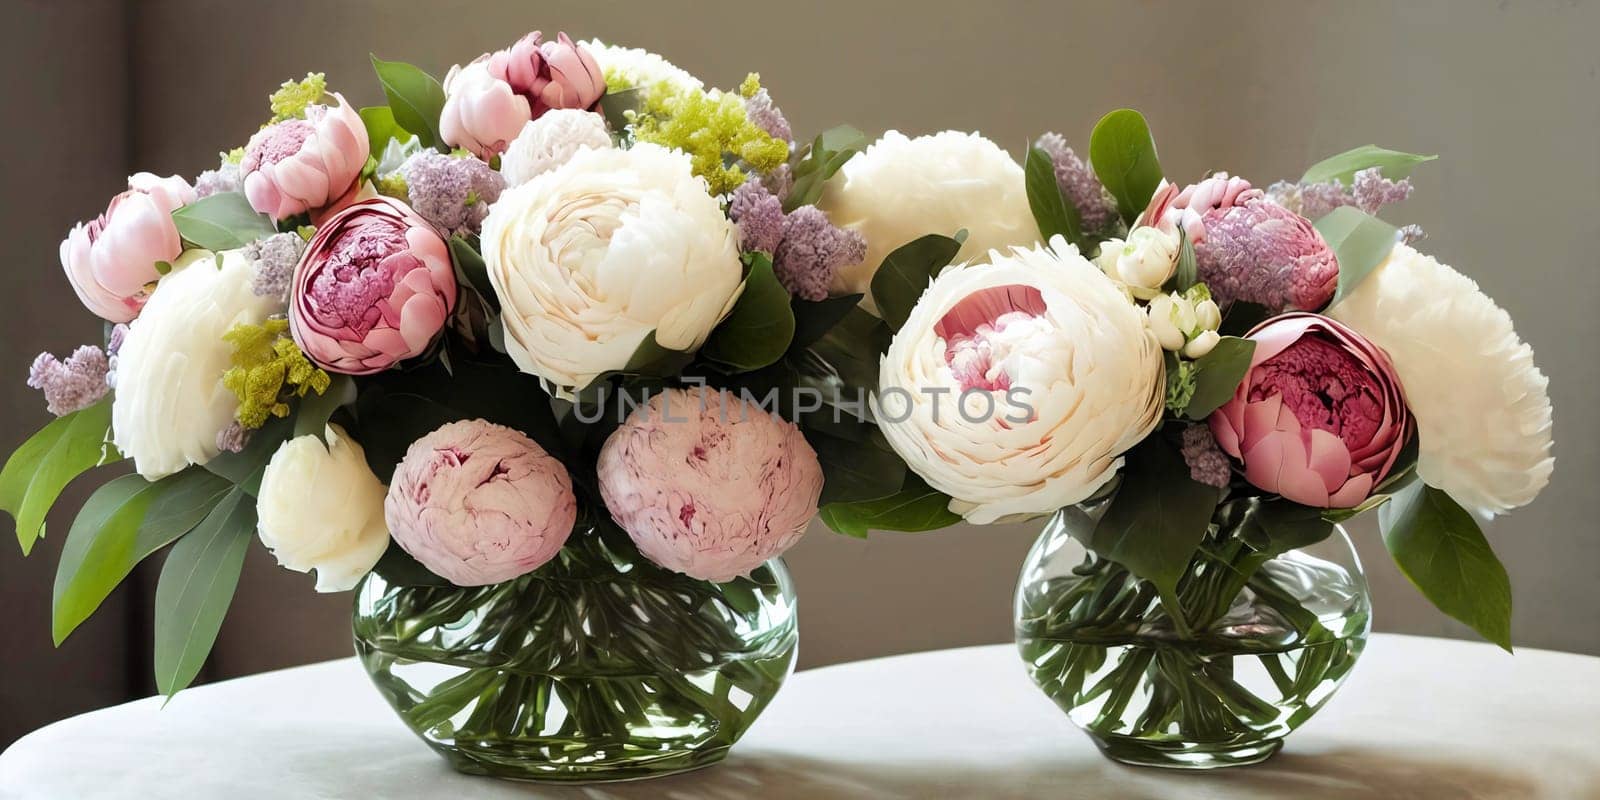 Sophisticated floral arrangement using a mix of different blooms such as peonies, hydrangeas, and ranunculus. Panorama